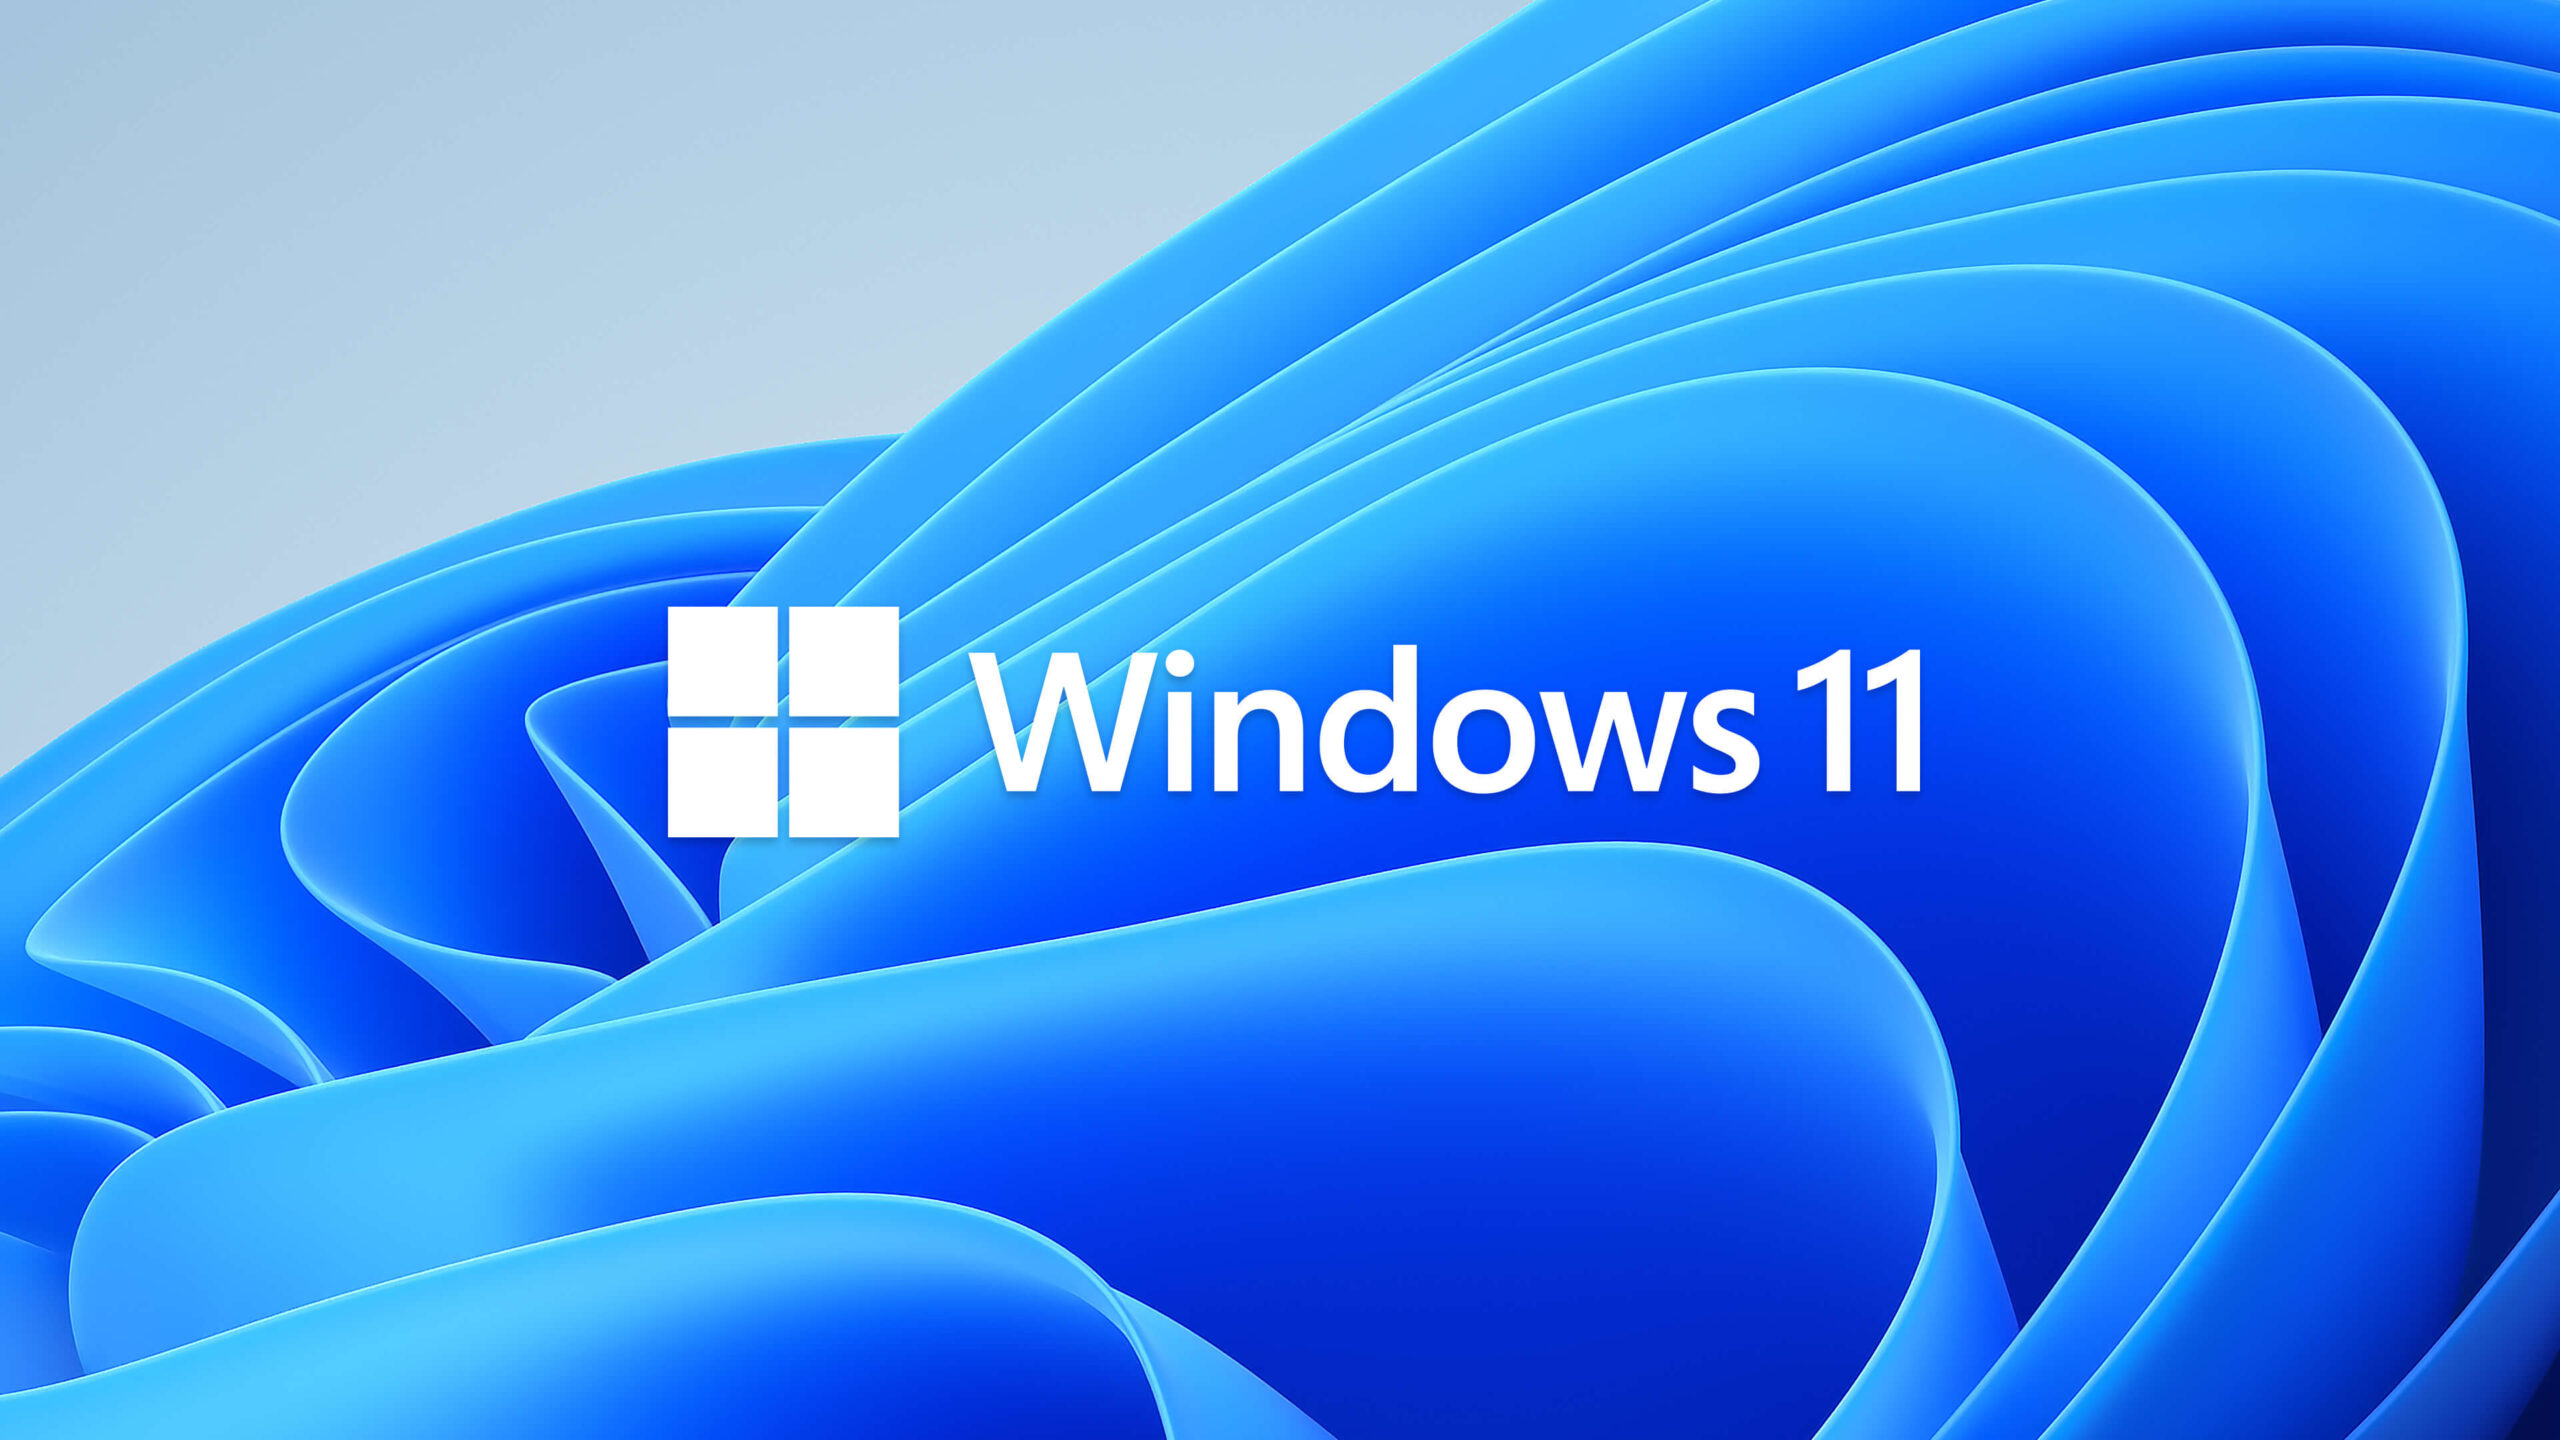 Microsoft’s Windows 11 operating system leaked online